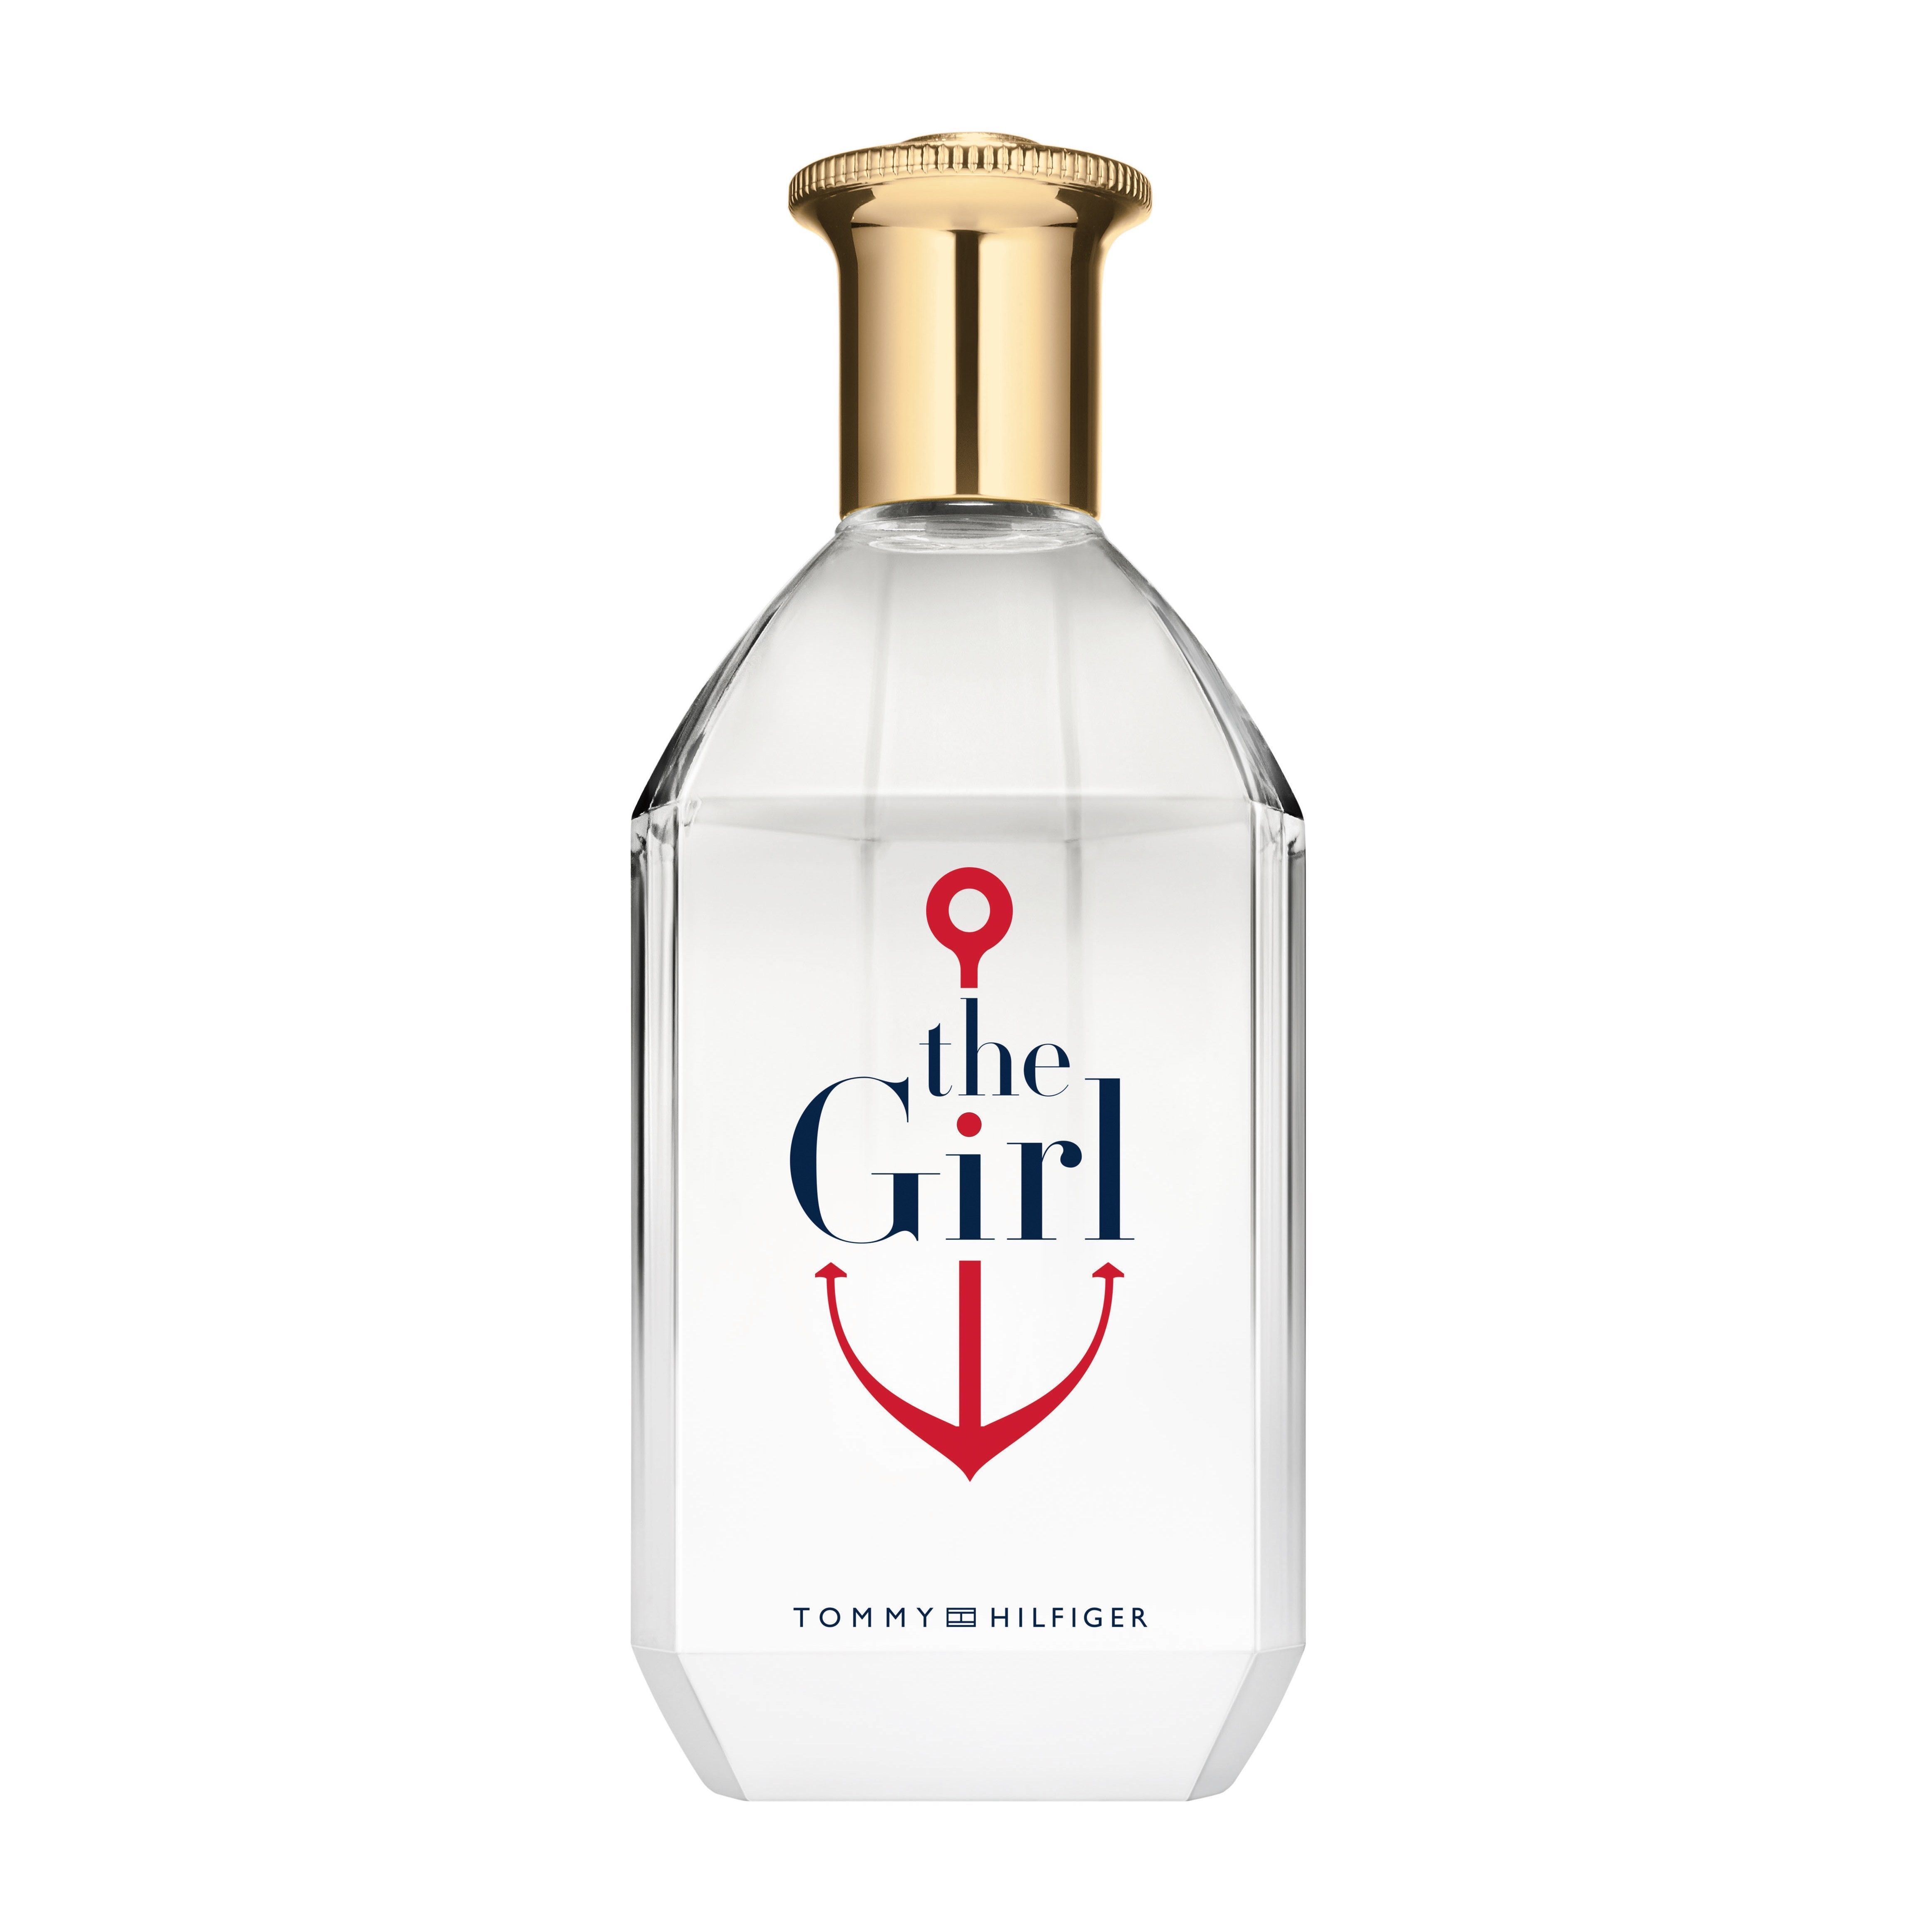 THE GIRL by Tommy Hilfiger